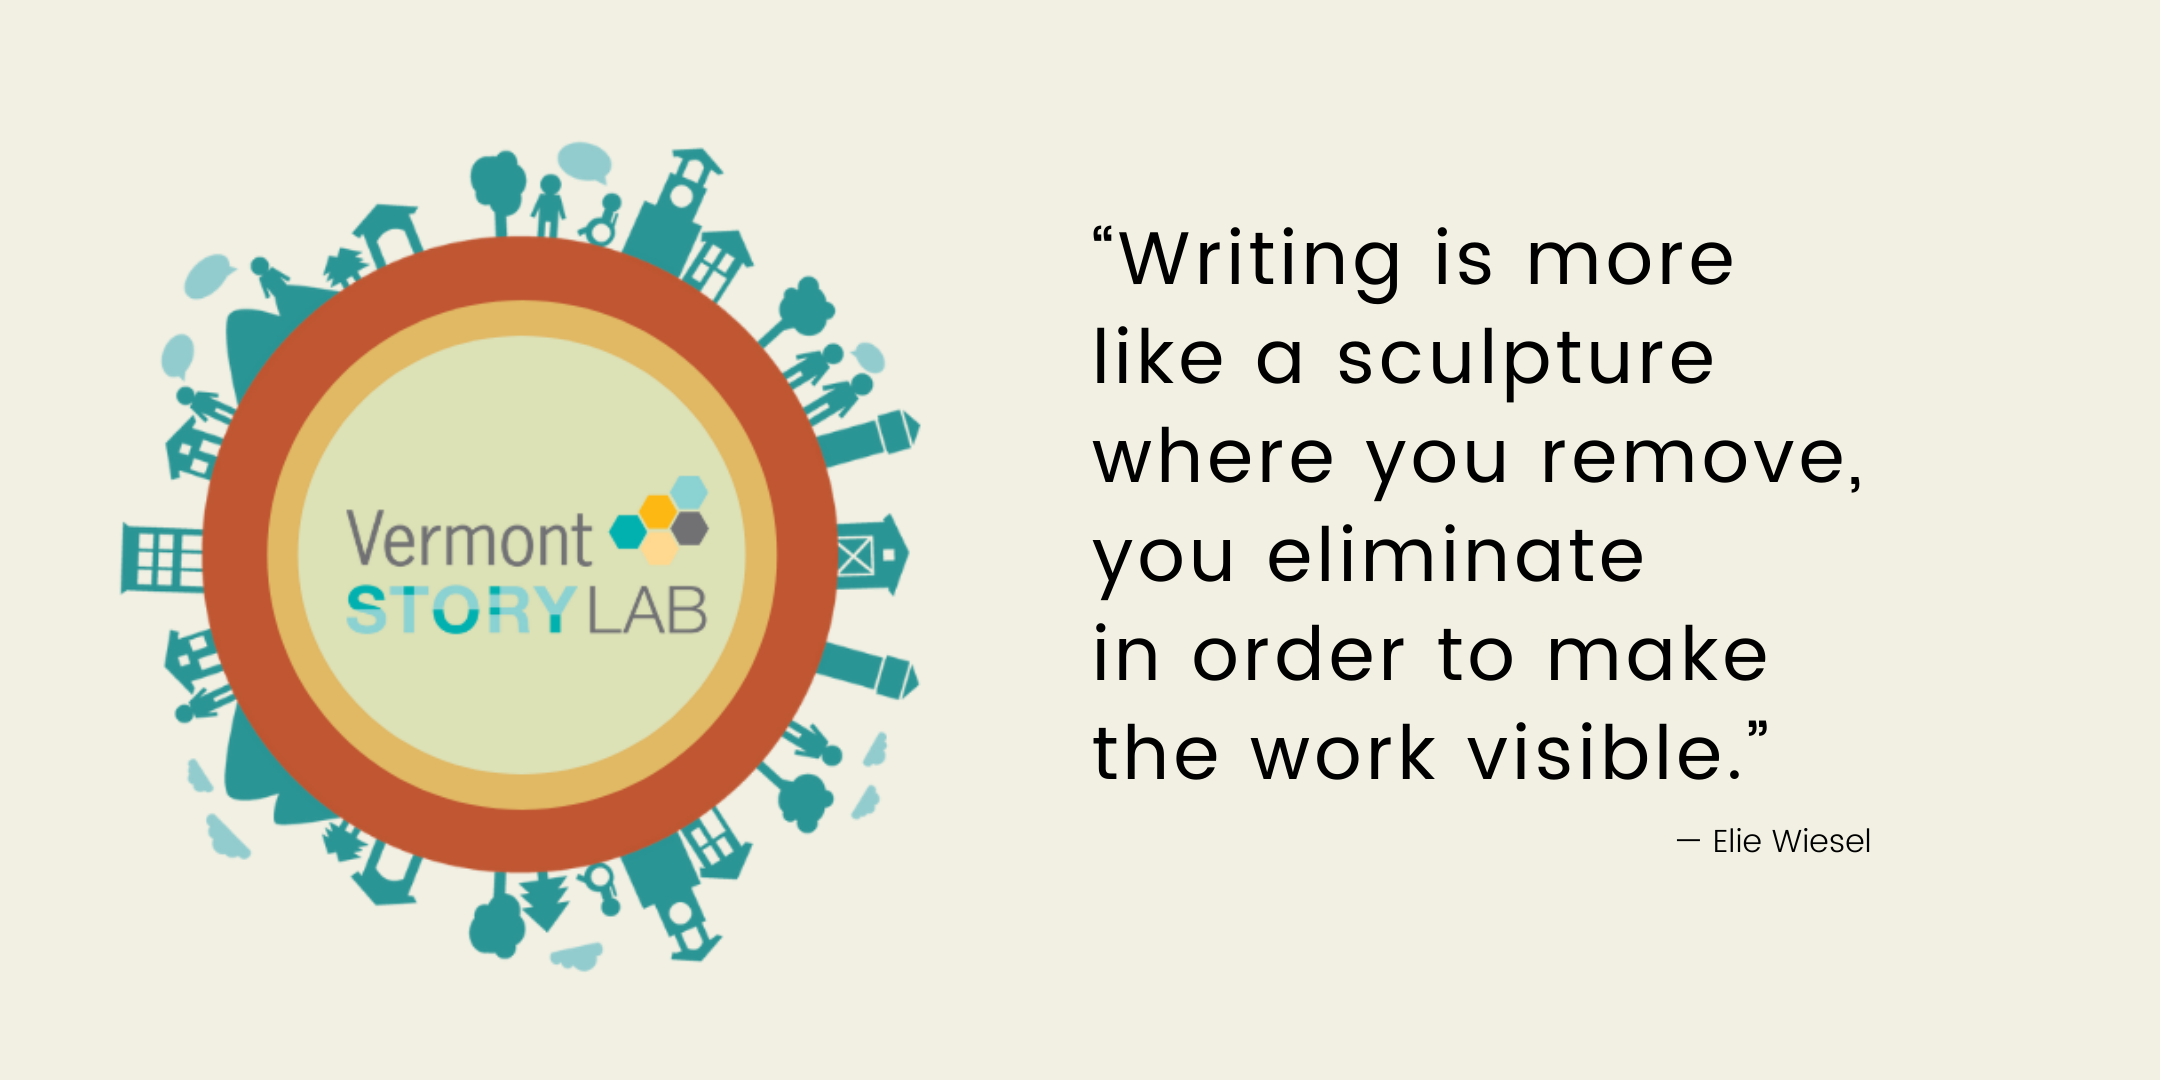 Quote: "Writing is more like a sculpture where you remove, you eliminate in order to make the work visible." -- Elie Wiesel